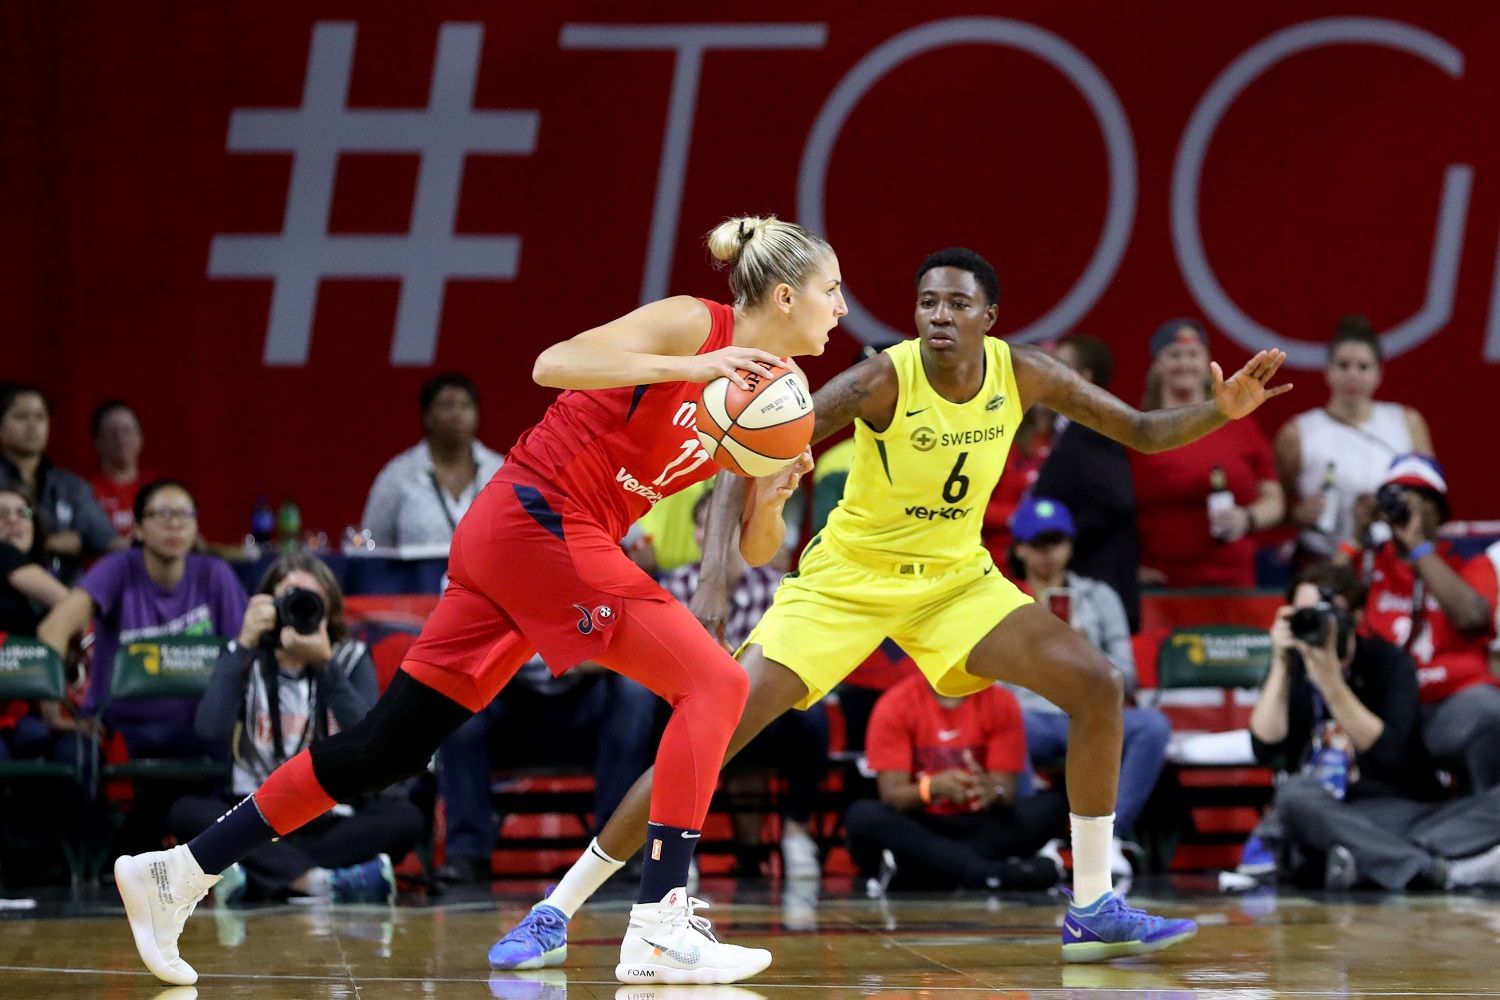 FAIRFAX, VA - SEPTEMBER 12: Elena Delle Donne #11 of the Washington Mystics drives to the basket against Natasha Howard #6 of the Seattle Storm in the first half during game three of the WNBA Finals at EagleBank Arena on September 12, 2018 in Fairfax, Virginia. (Photo by Rob Carr/Getty Images)